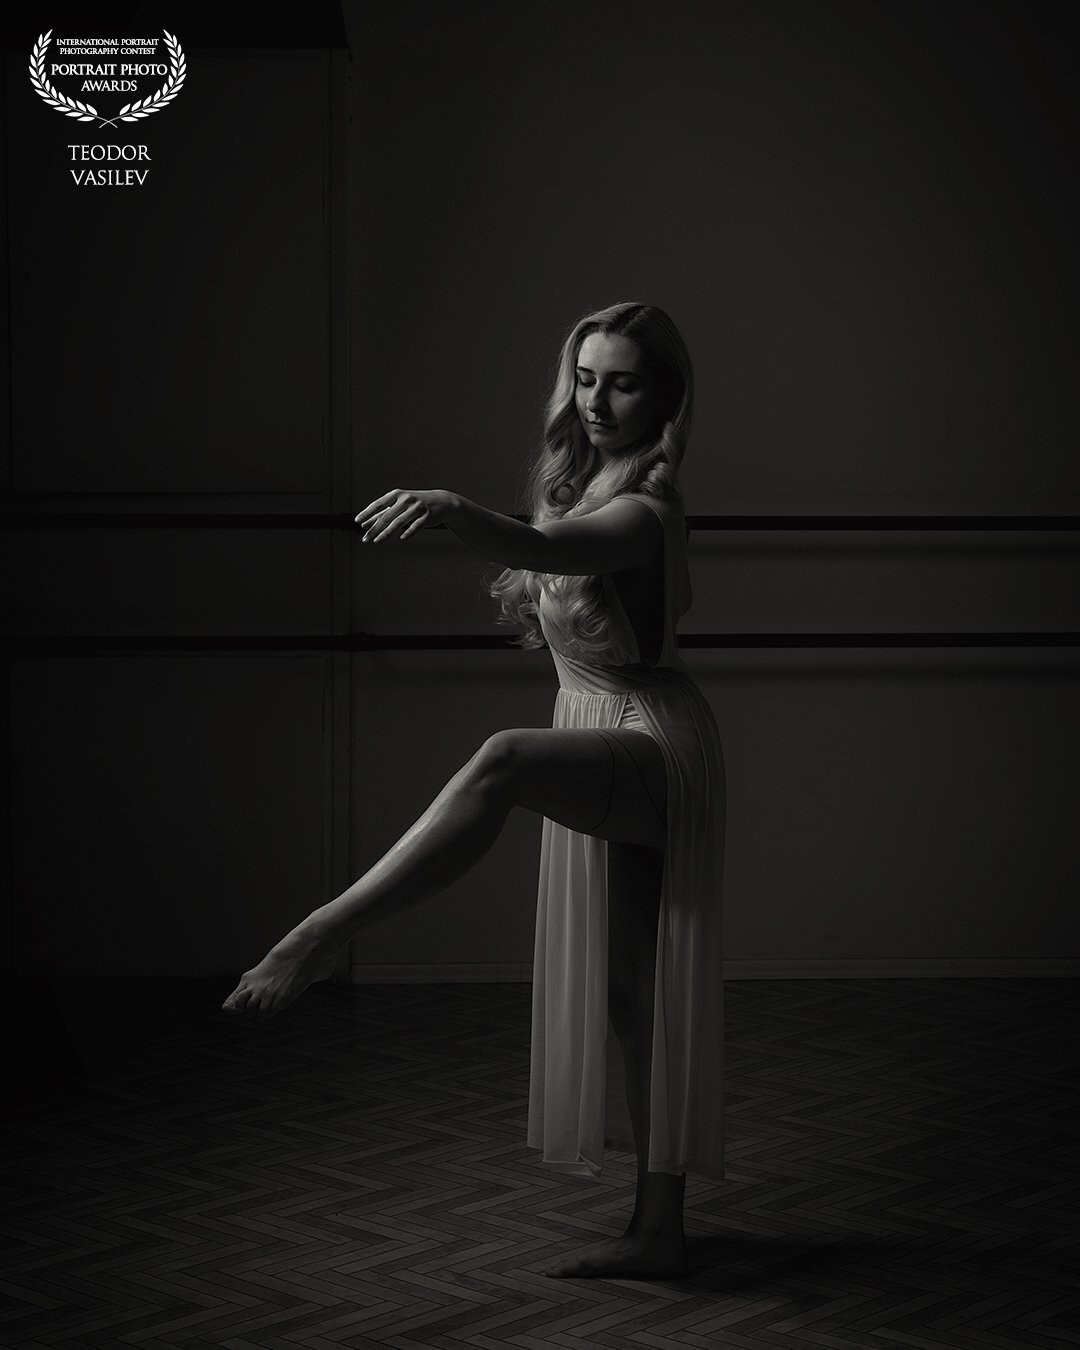 Lora is a former ballet dancer. However ballet will always be a passion. The photo was taken in a ballet dance room with one light only.